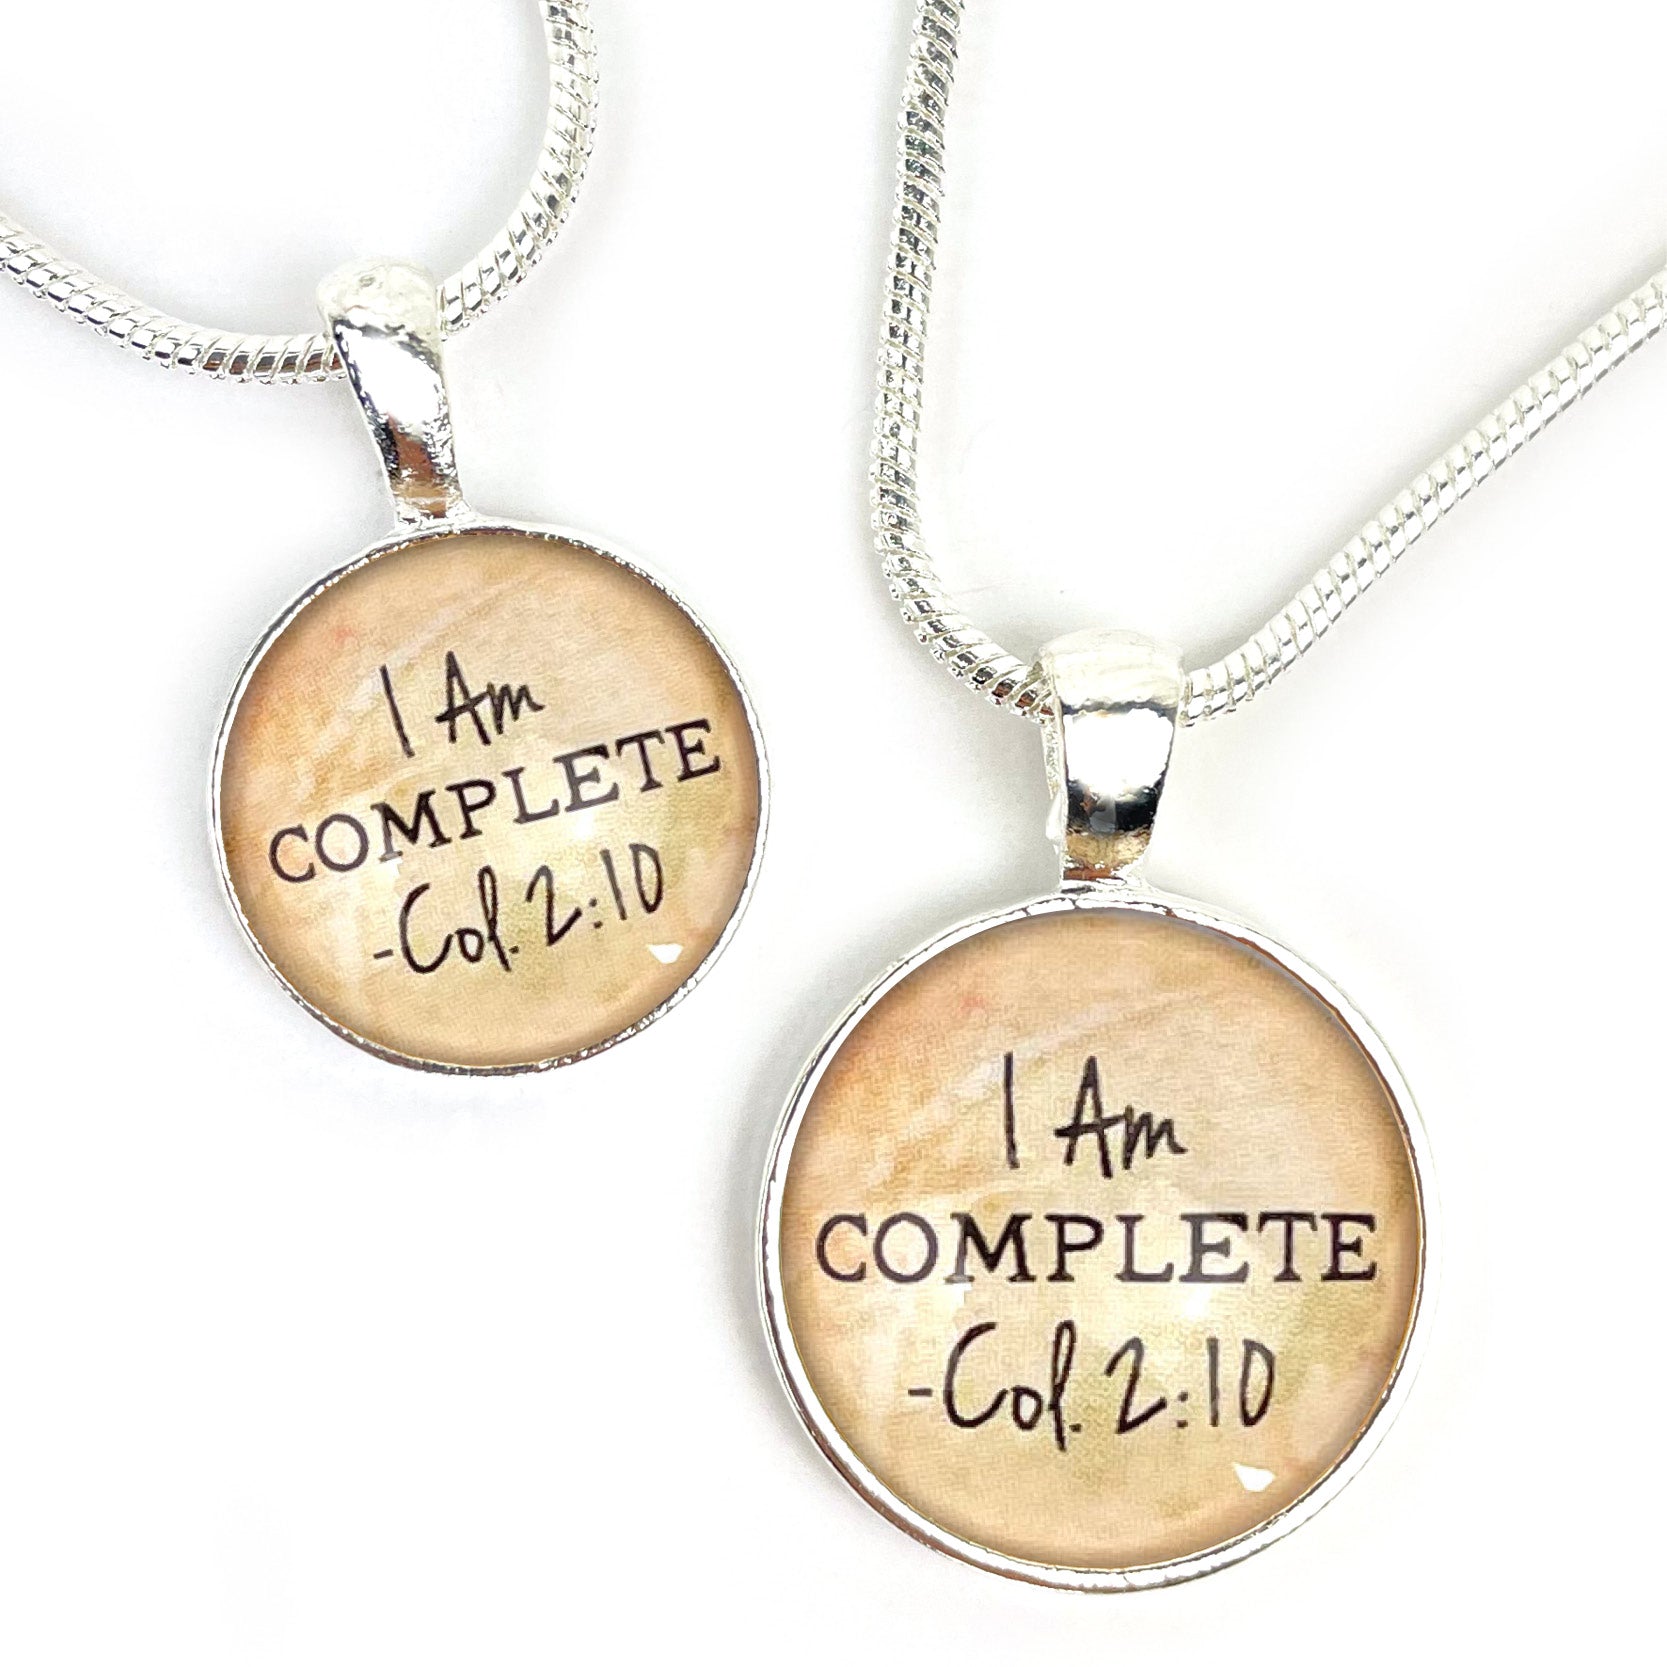 I AM Complete, Colossians 2:10 Christian Affirmations Necklace